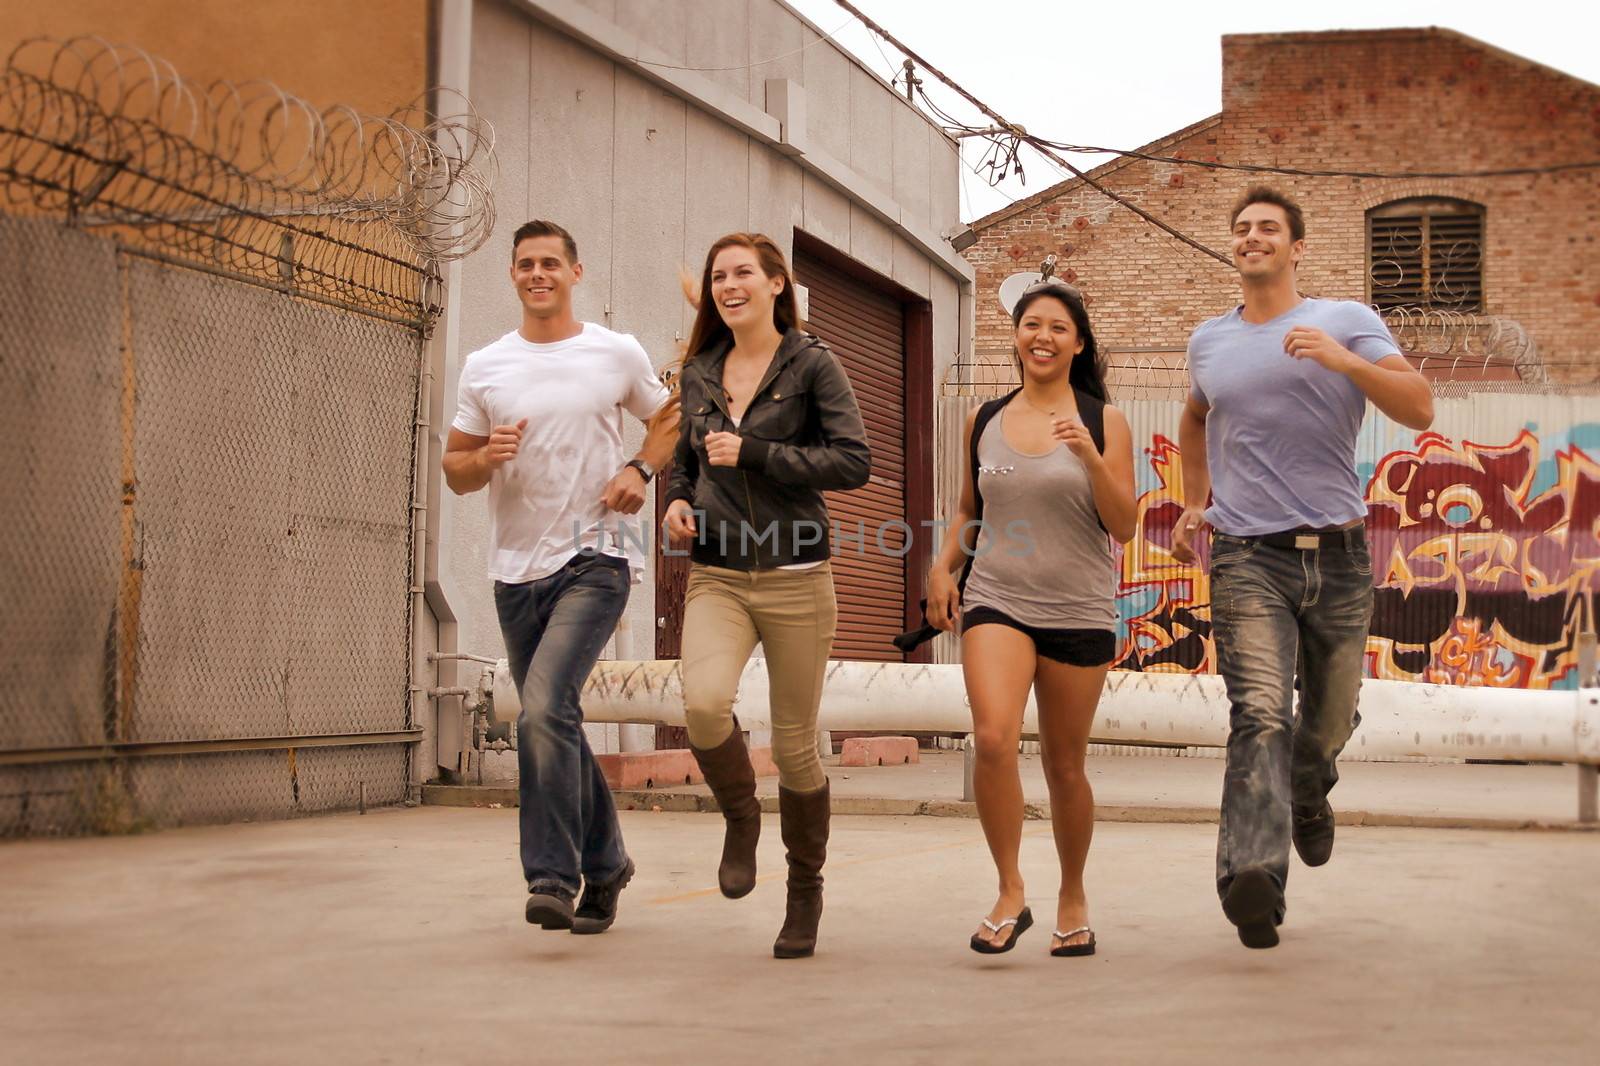 Group of friends running in urban environment.